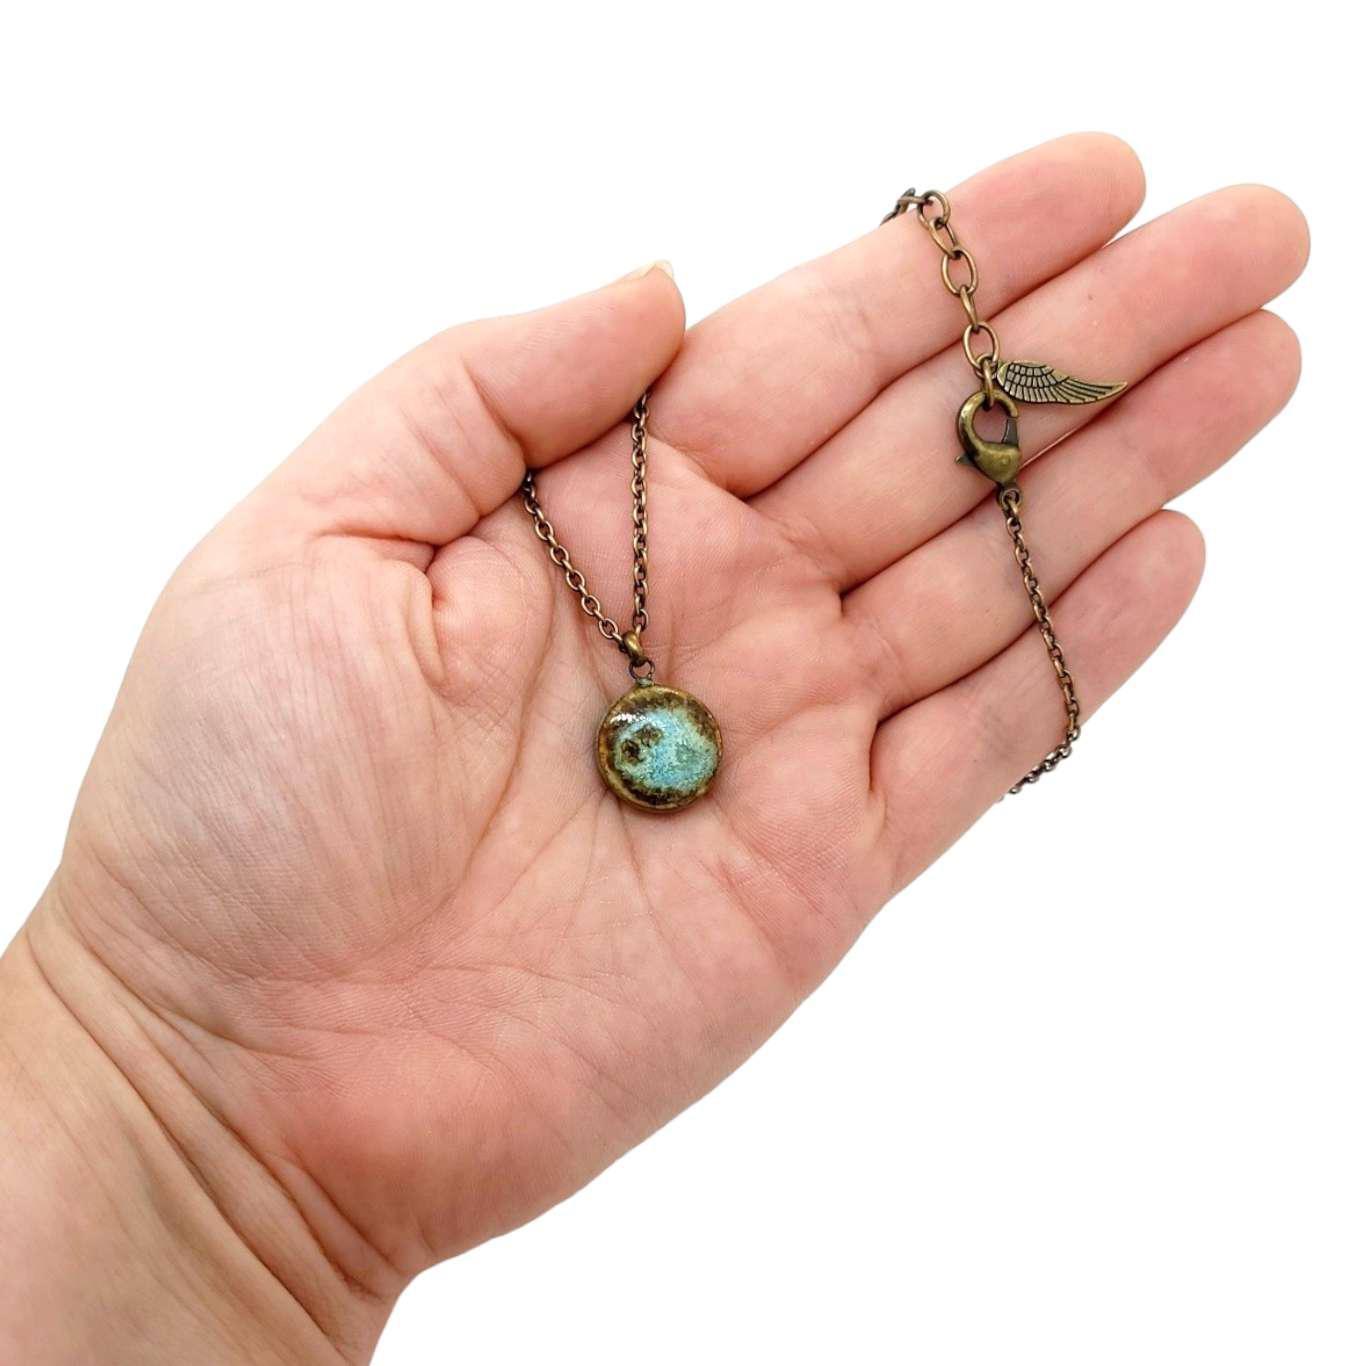 Necklace - Mini Circle in Earth by Dandy Jewelry